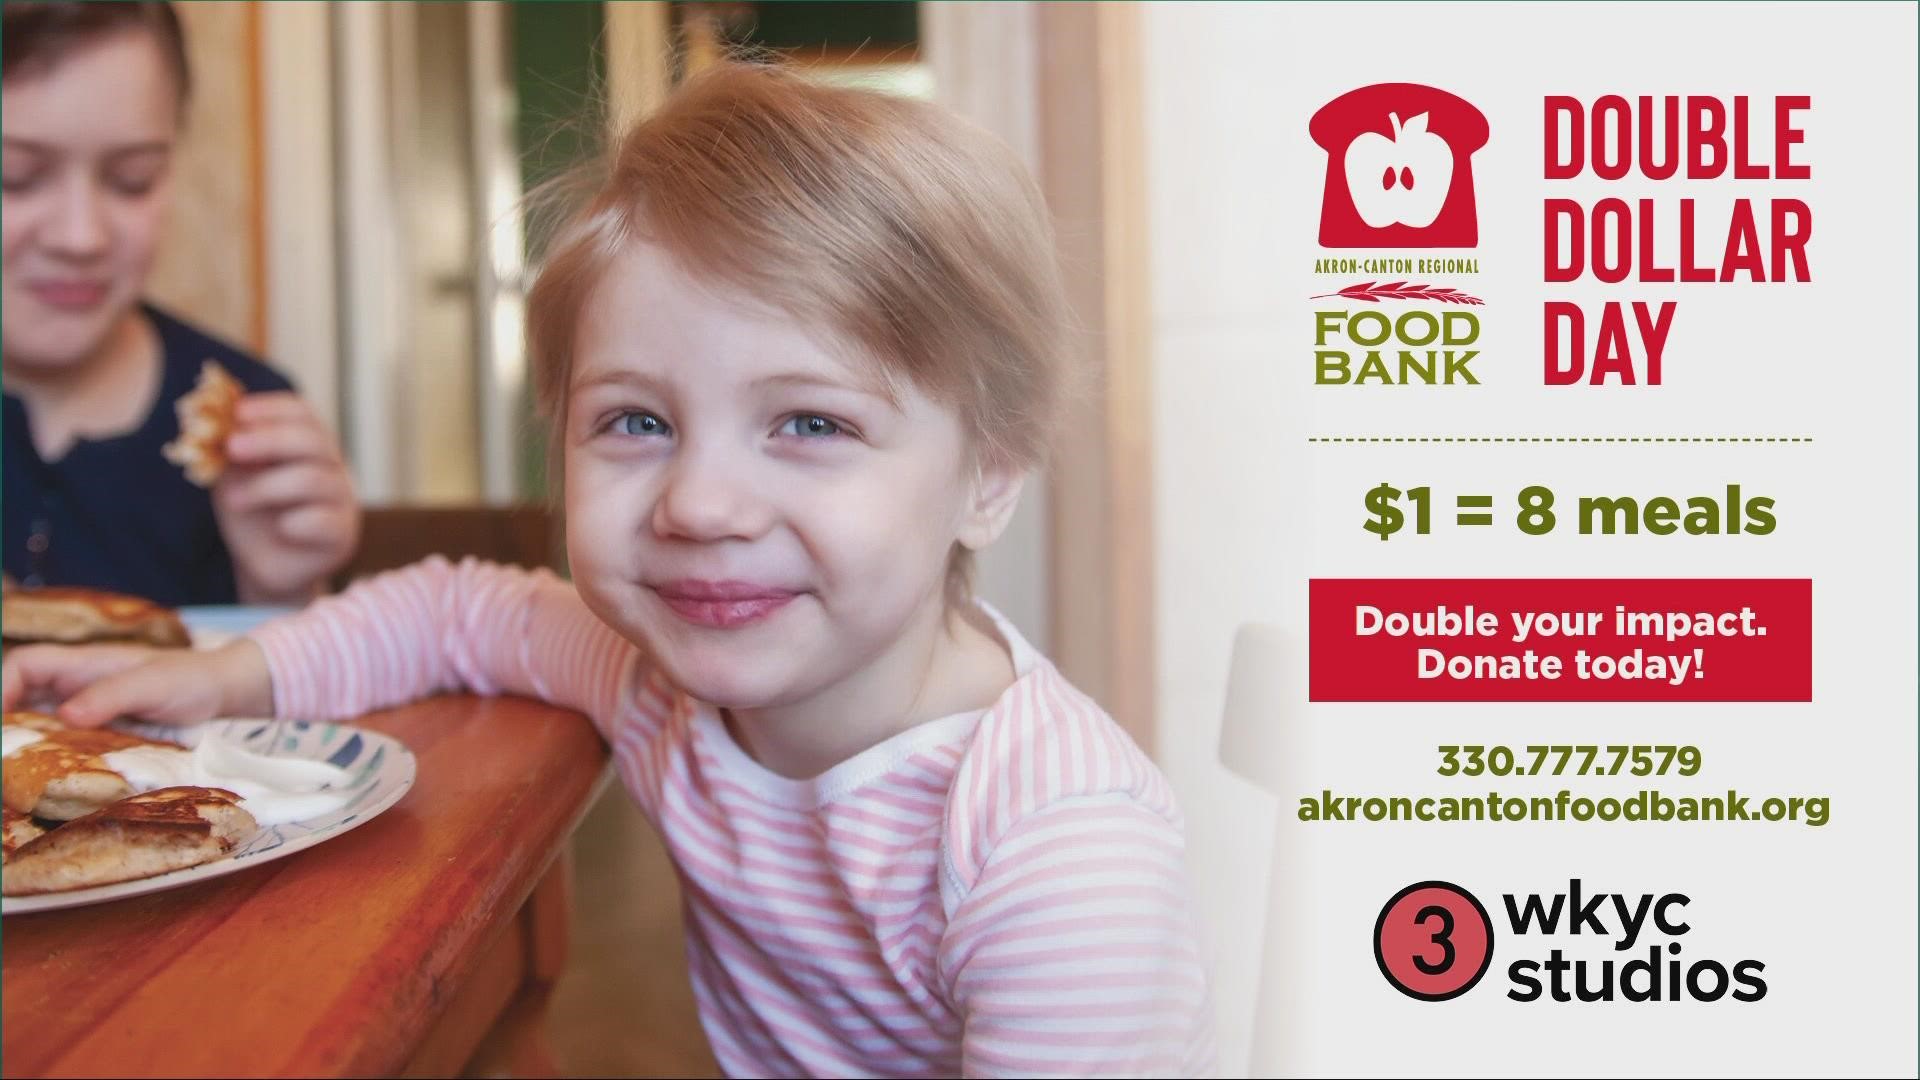 On Dec. 1, all donations made by phone and online for the Akron-Canton Regional Foodbank will be matched, dollar for dollar, up to $115,000.